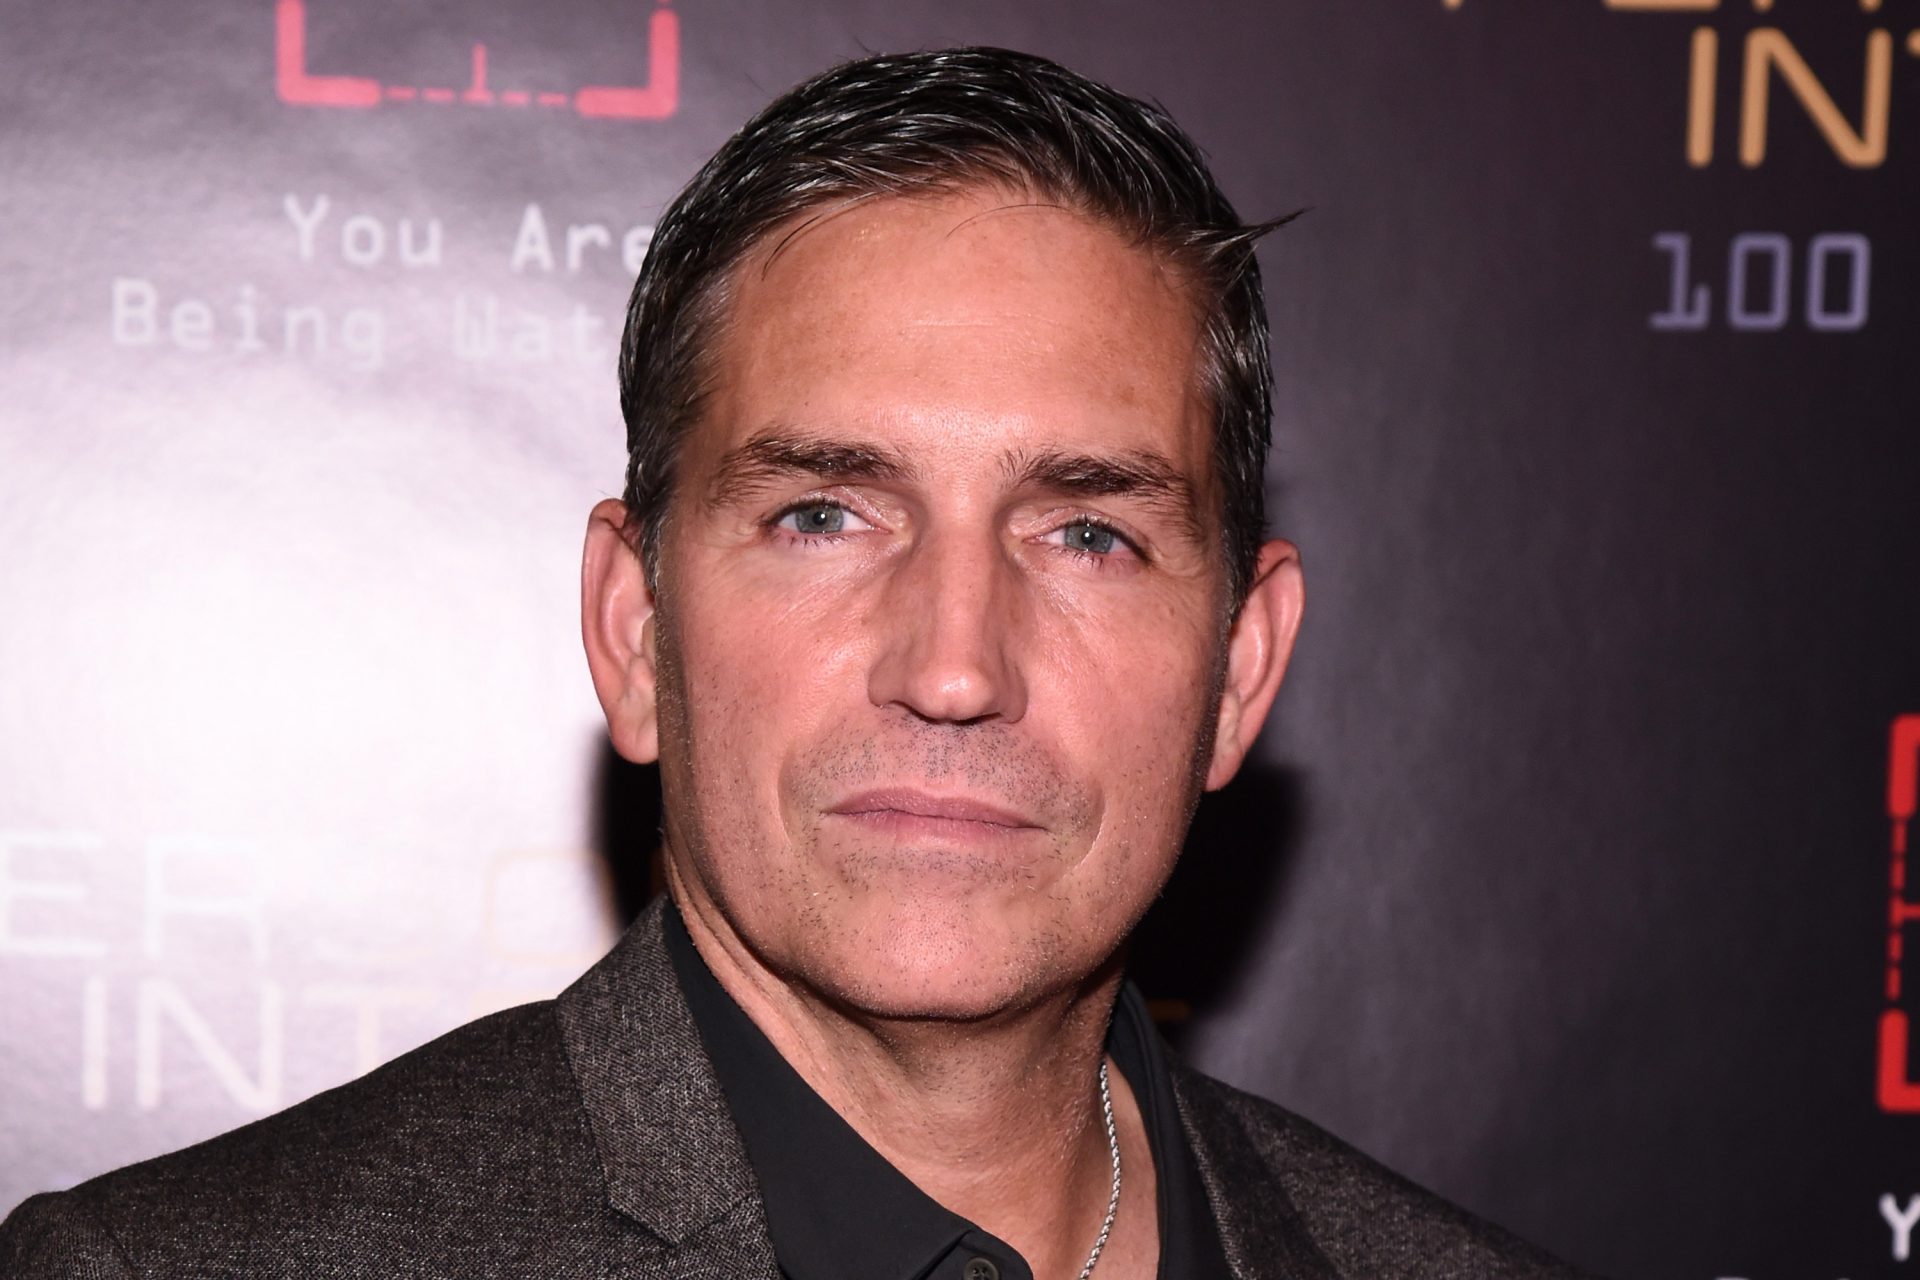 Jim Caviezel: All about the controversial actor who once played Jesus